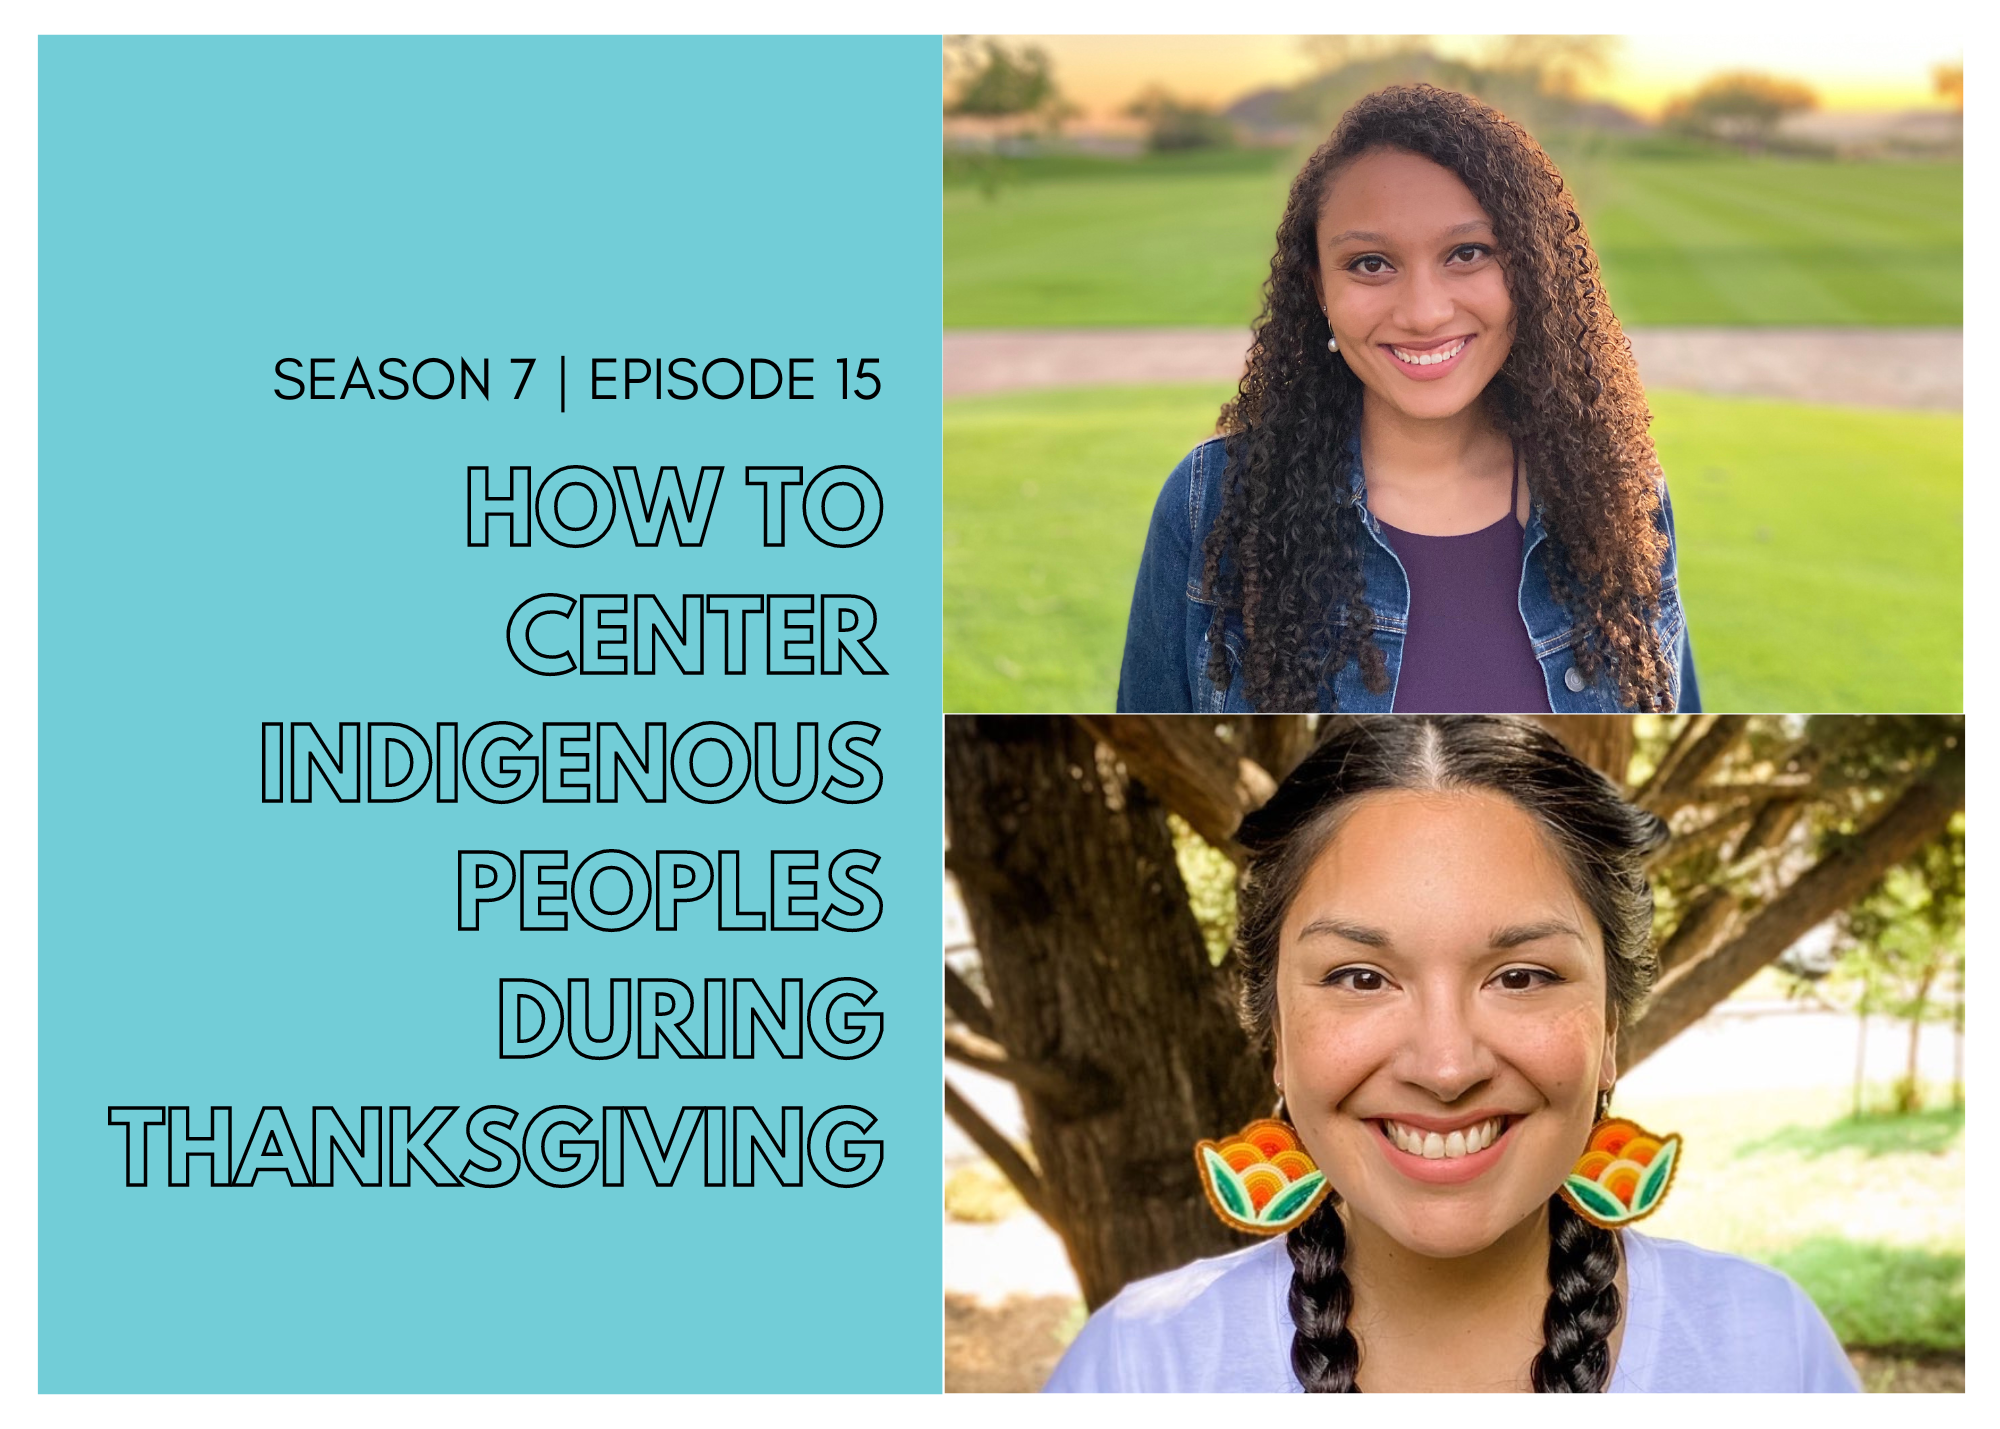 How to Center Indigenous Peoples During Thanksgiving